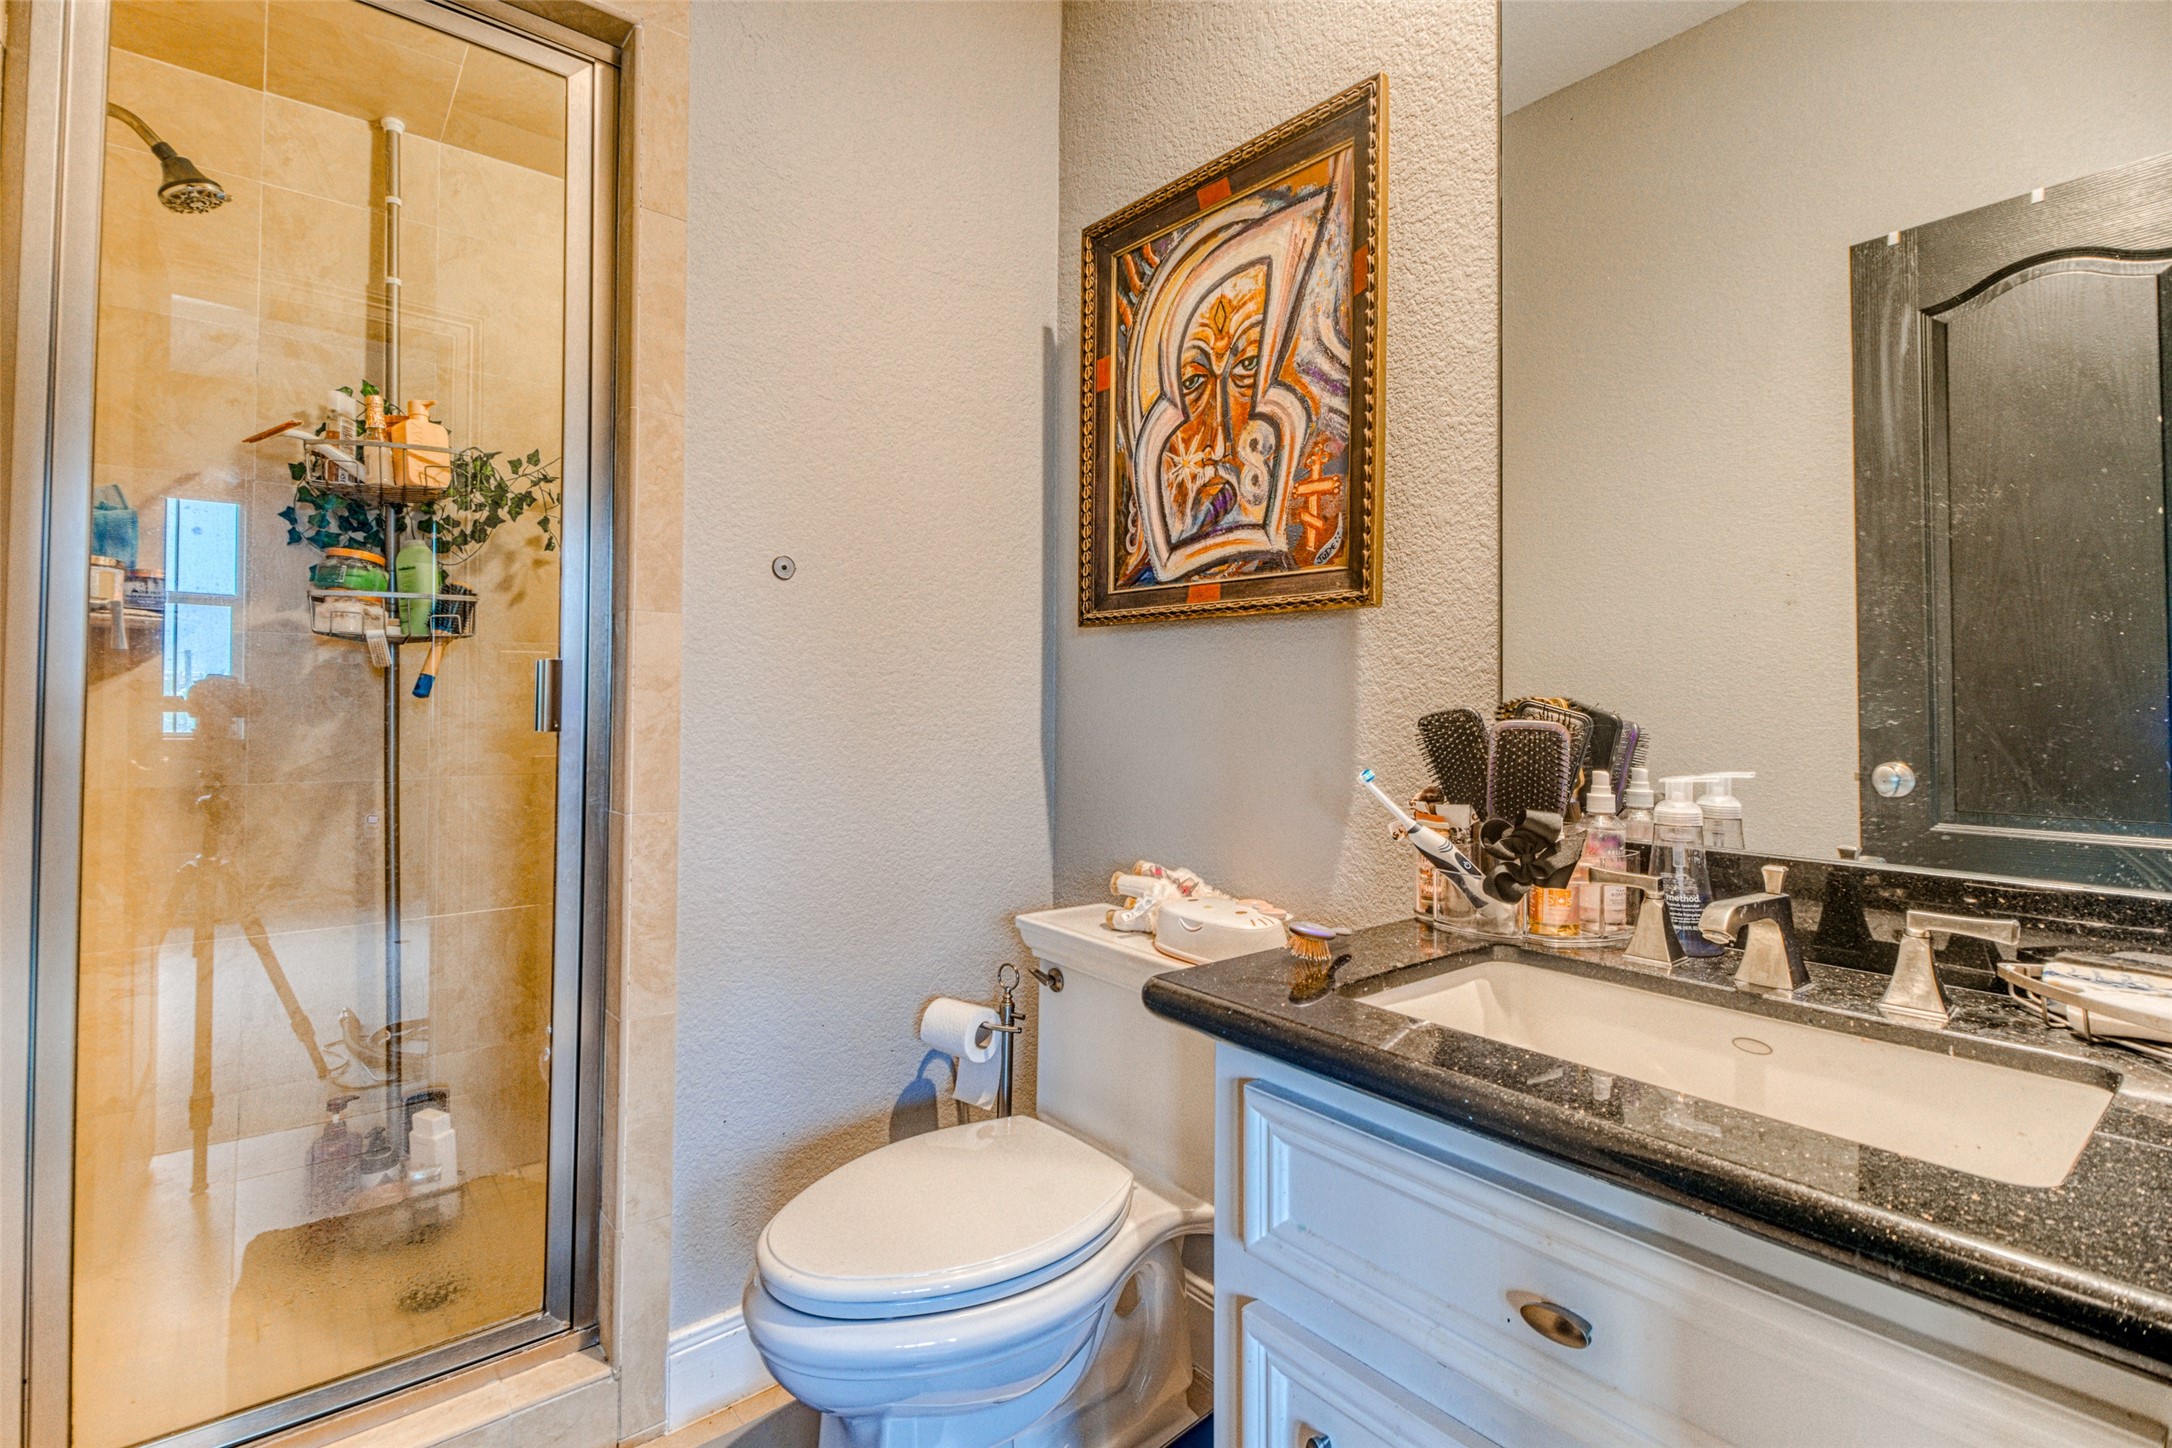 The fourth floor bathroom is chic and contemporary with neutral tones, undermount sink and a full tile surround walk-in shower with built-in bench - only the best for family and long-term guests.